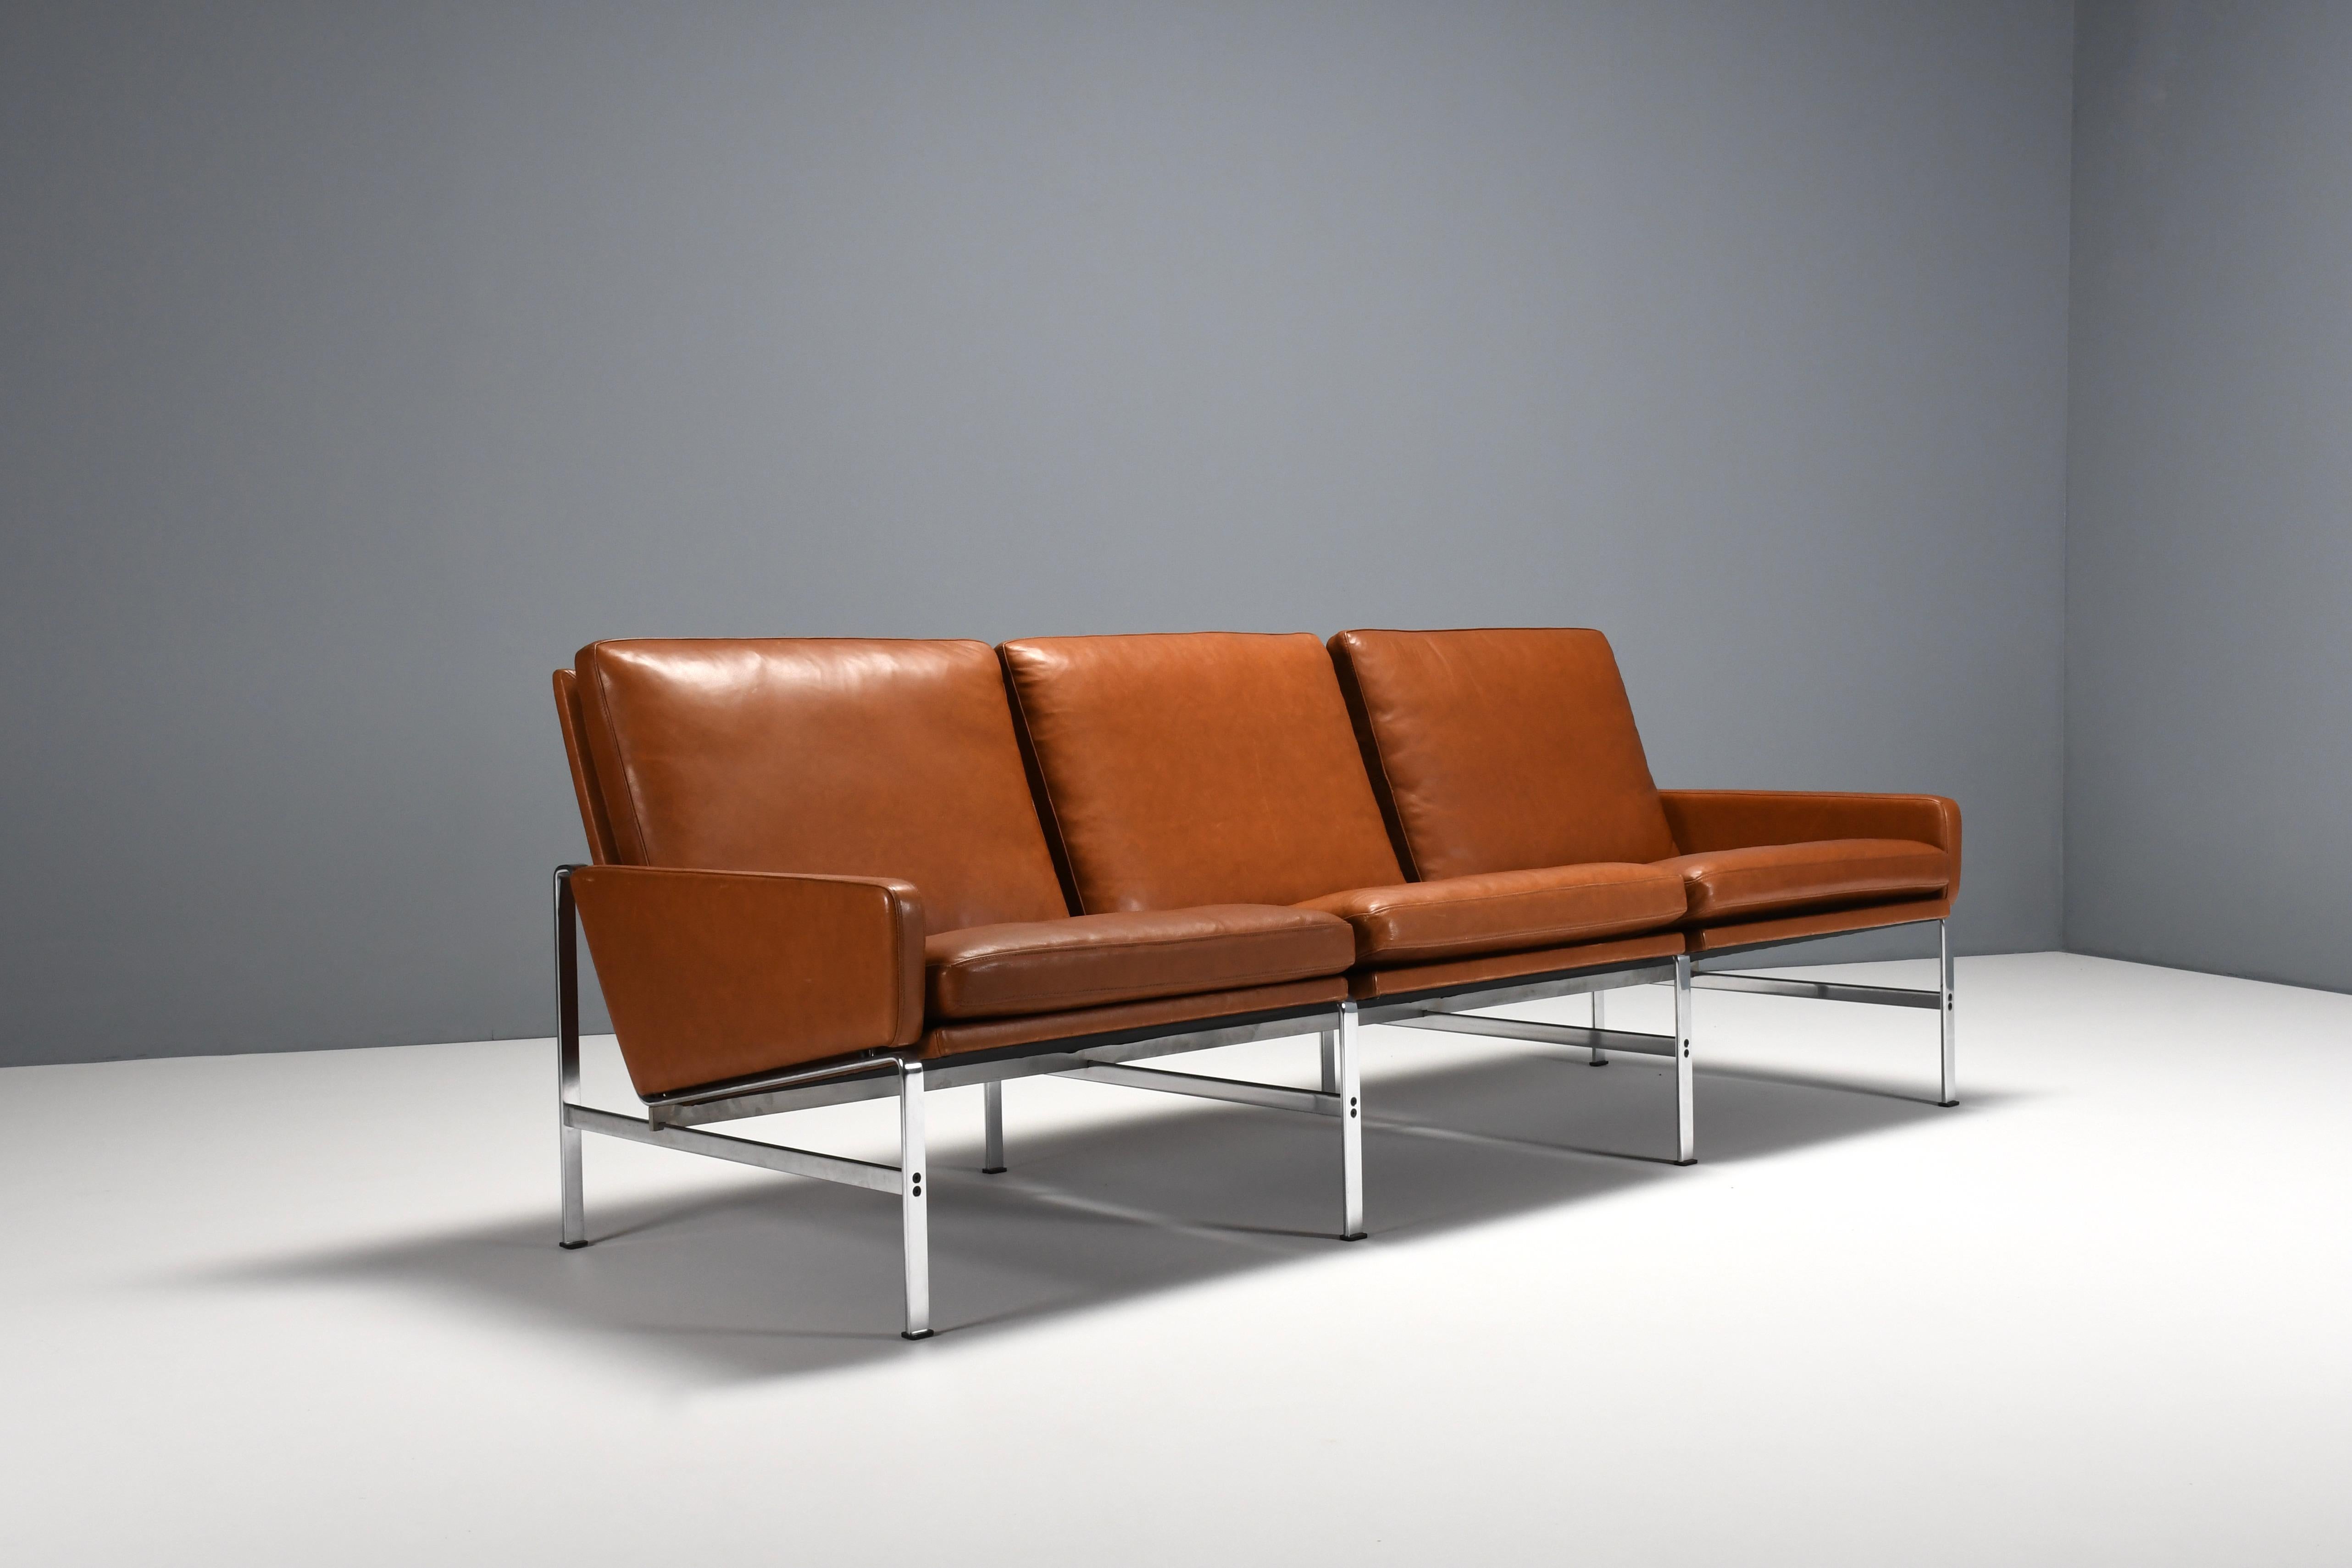 Rare 3-seat 6720 sofa in very good condition.

Designed by Preben Fabricius & Jørgen Kastholm in the1960s. 

Manufactured by Kill International.

The sofa has a chromed metal base, which is connected with black screws.

It still has the original